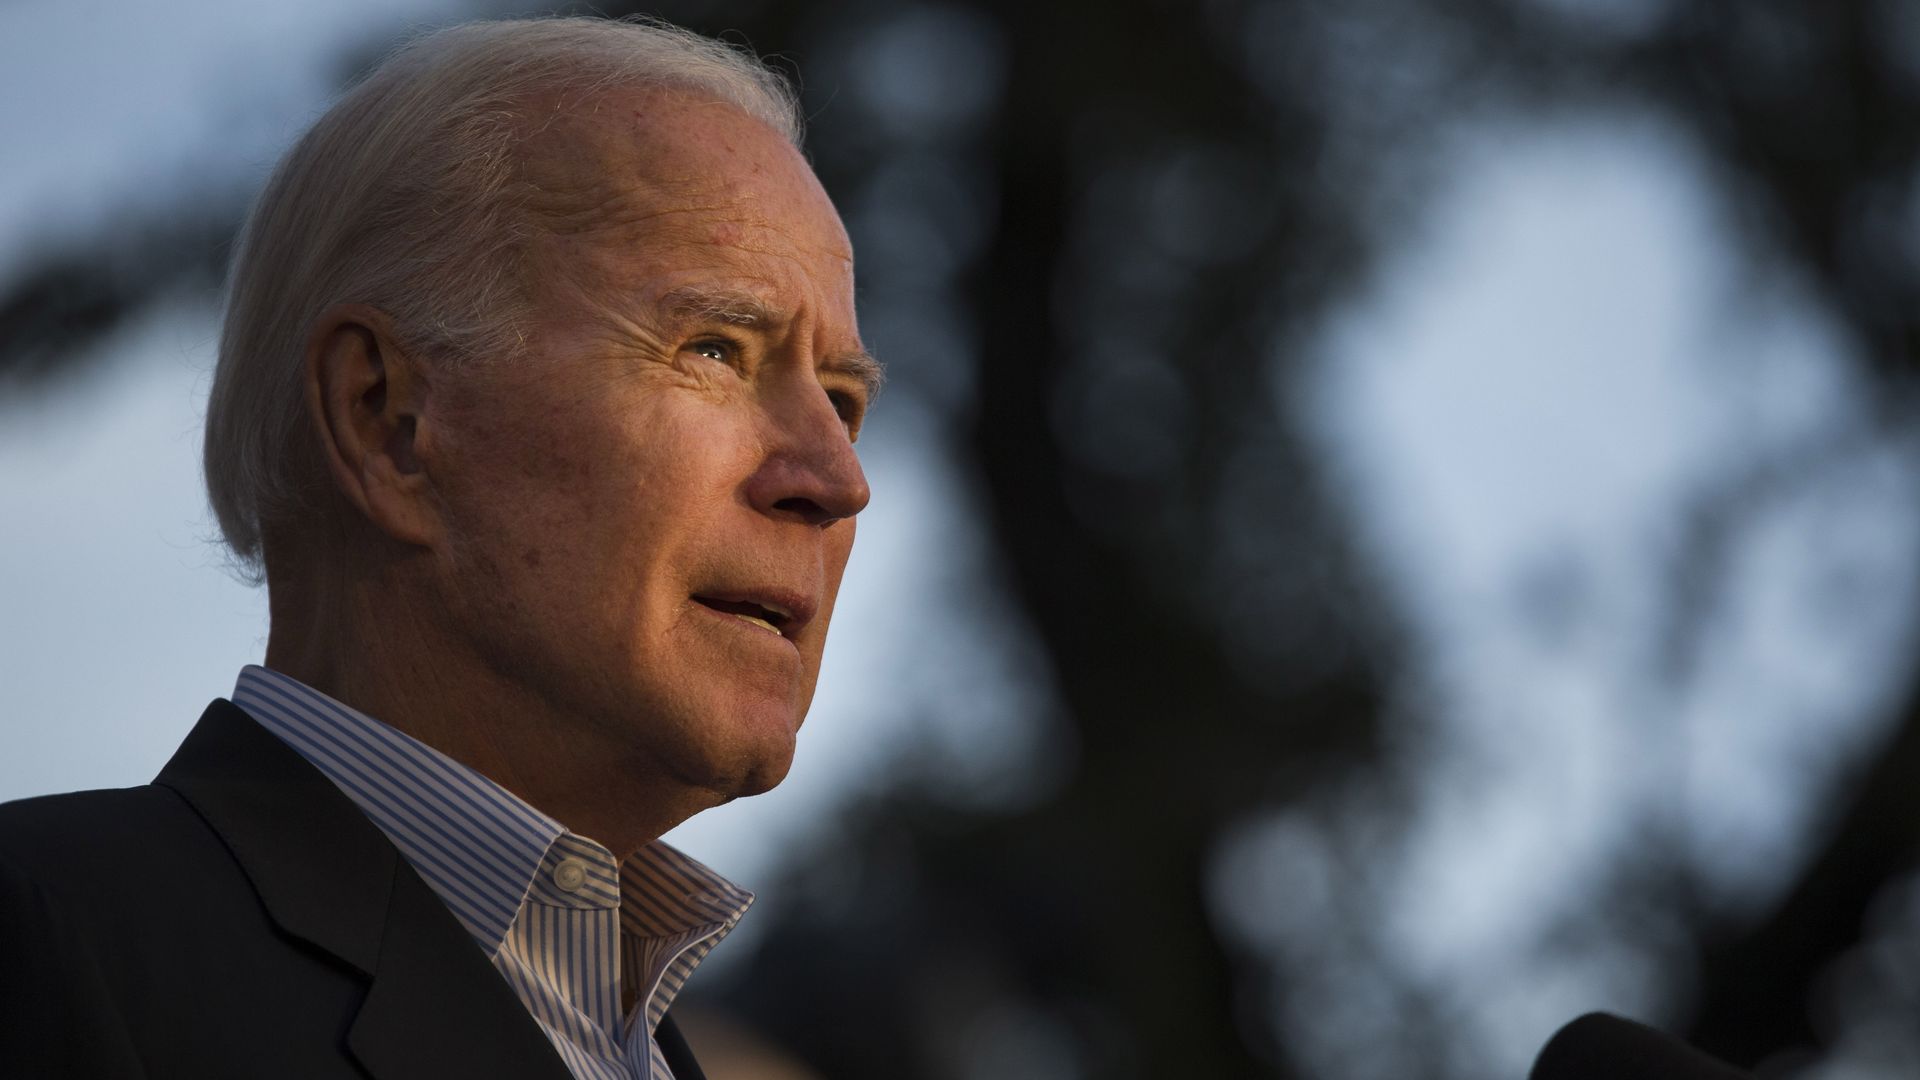 Democratic presidential candidate and former U.S. Vice President Joe Biden speaks at a community event while campaigning on December 13, 2019 in San Antonio, Texas